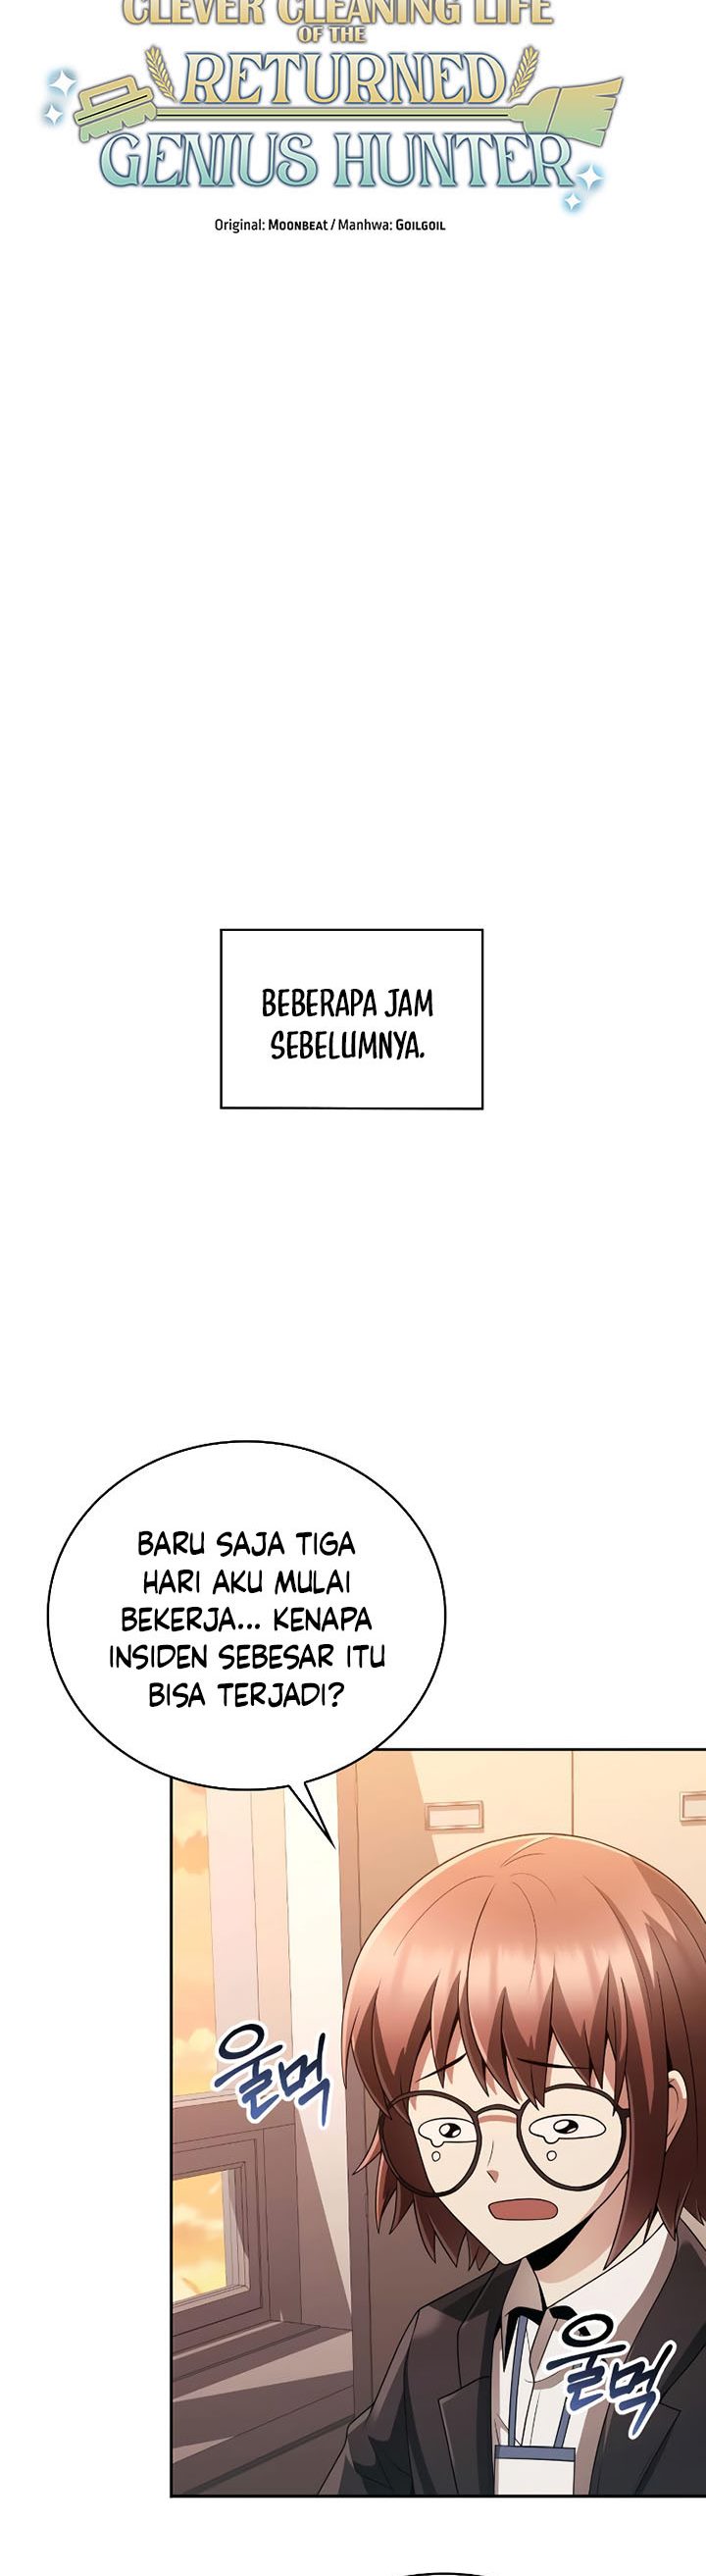 Dilarang COPAS - situs resmi www.mangacanblog.com - Komik clever cleaning life of the returned genius hunter 020 - chapter 20 21 Indonesia clever cleaning life of the returned genius hunter 020 - chapter 20 Terbaru 11|Baca Manga Komik Indonesia|Mangacan